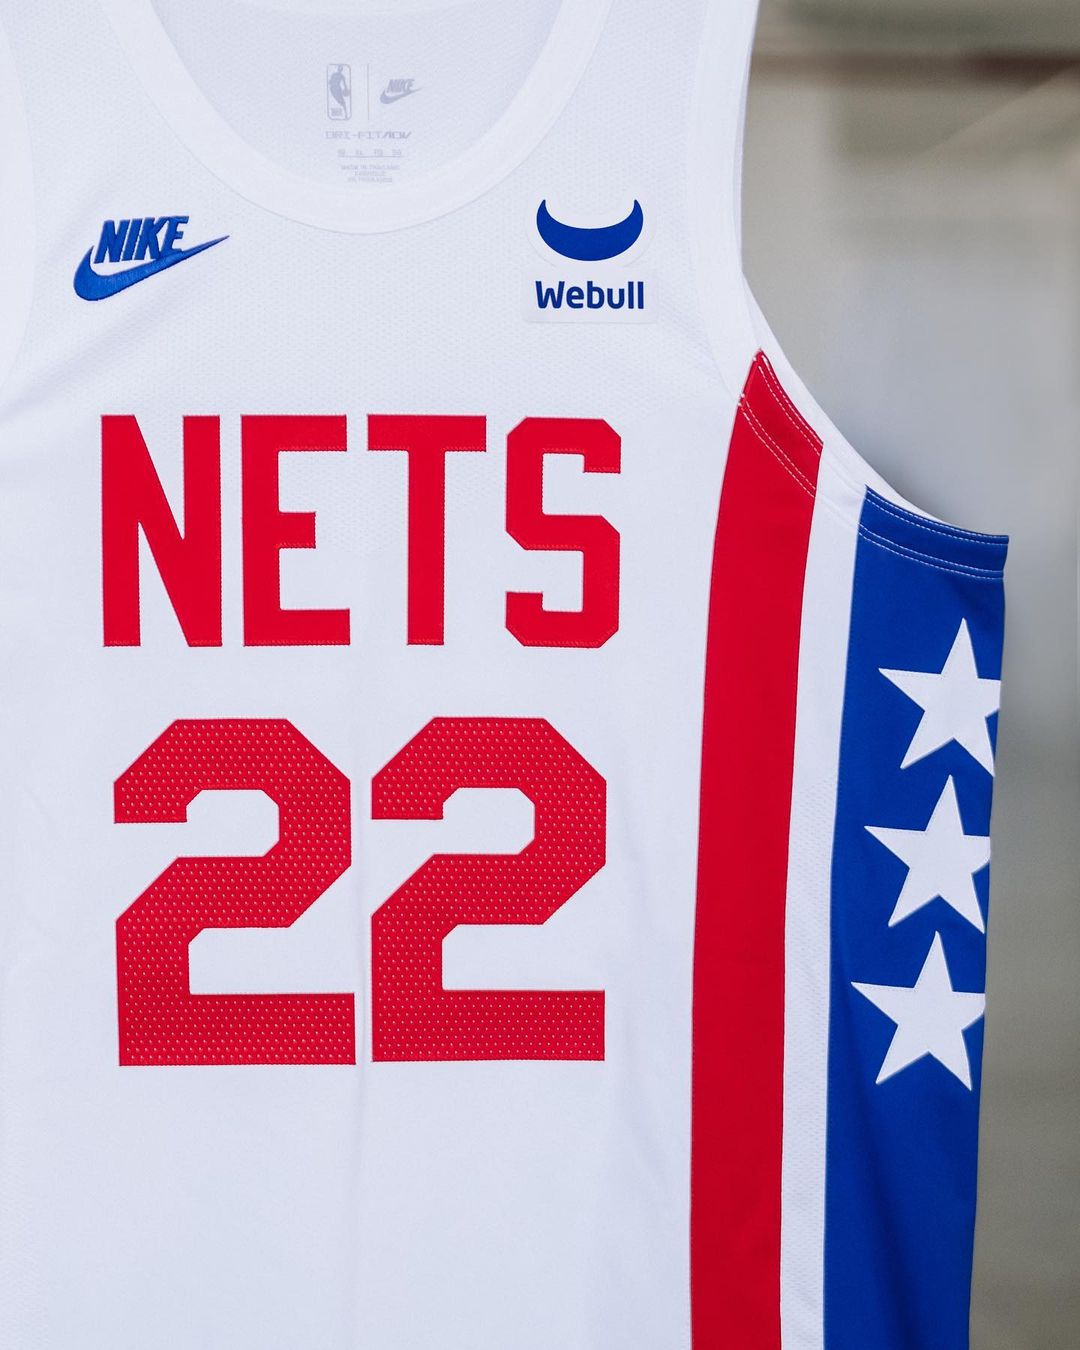 maillot Classic des nets stars and stripes dr j